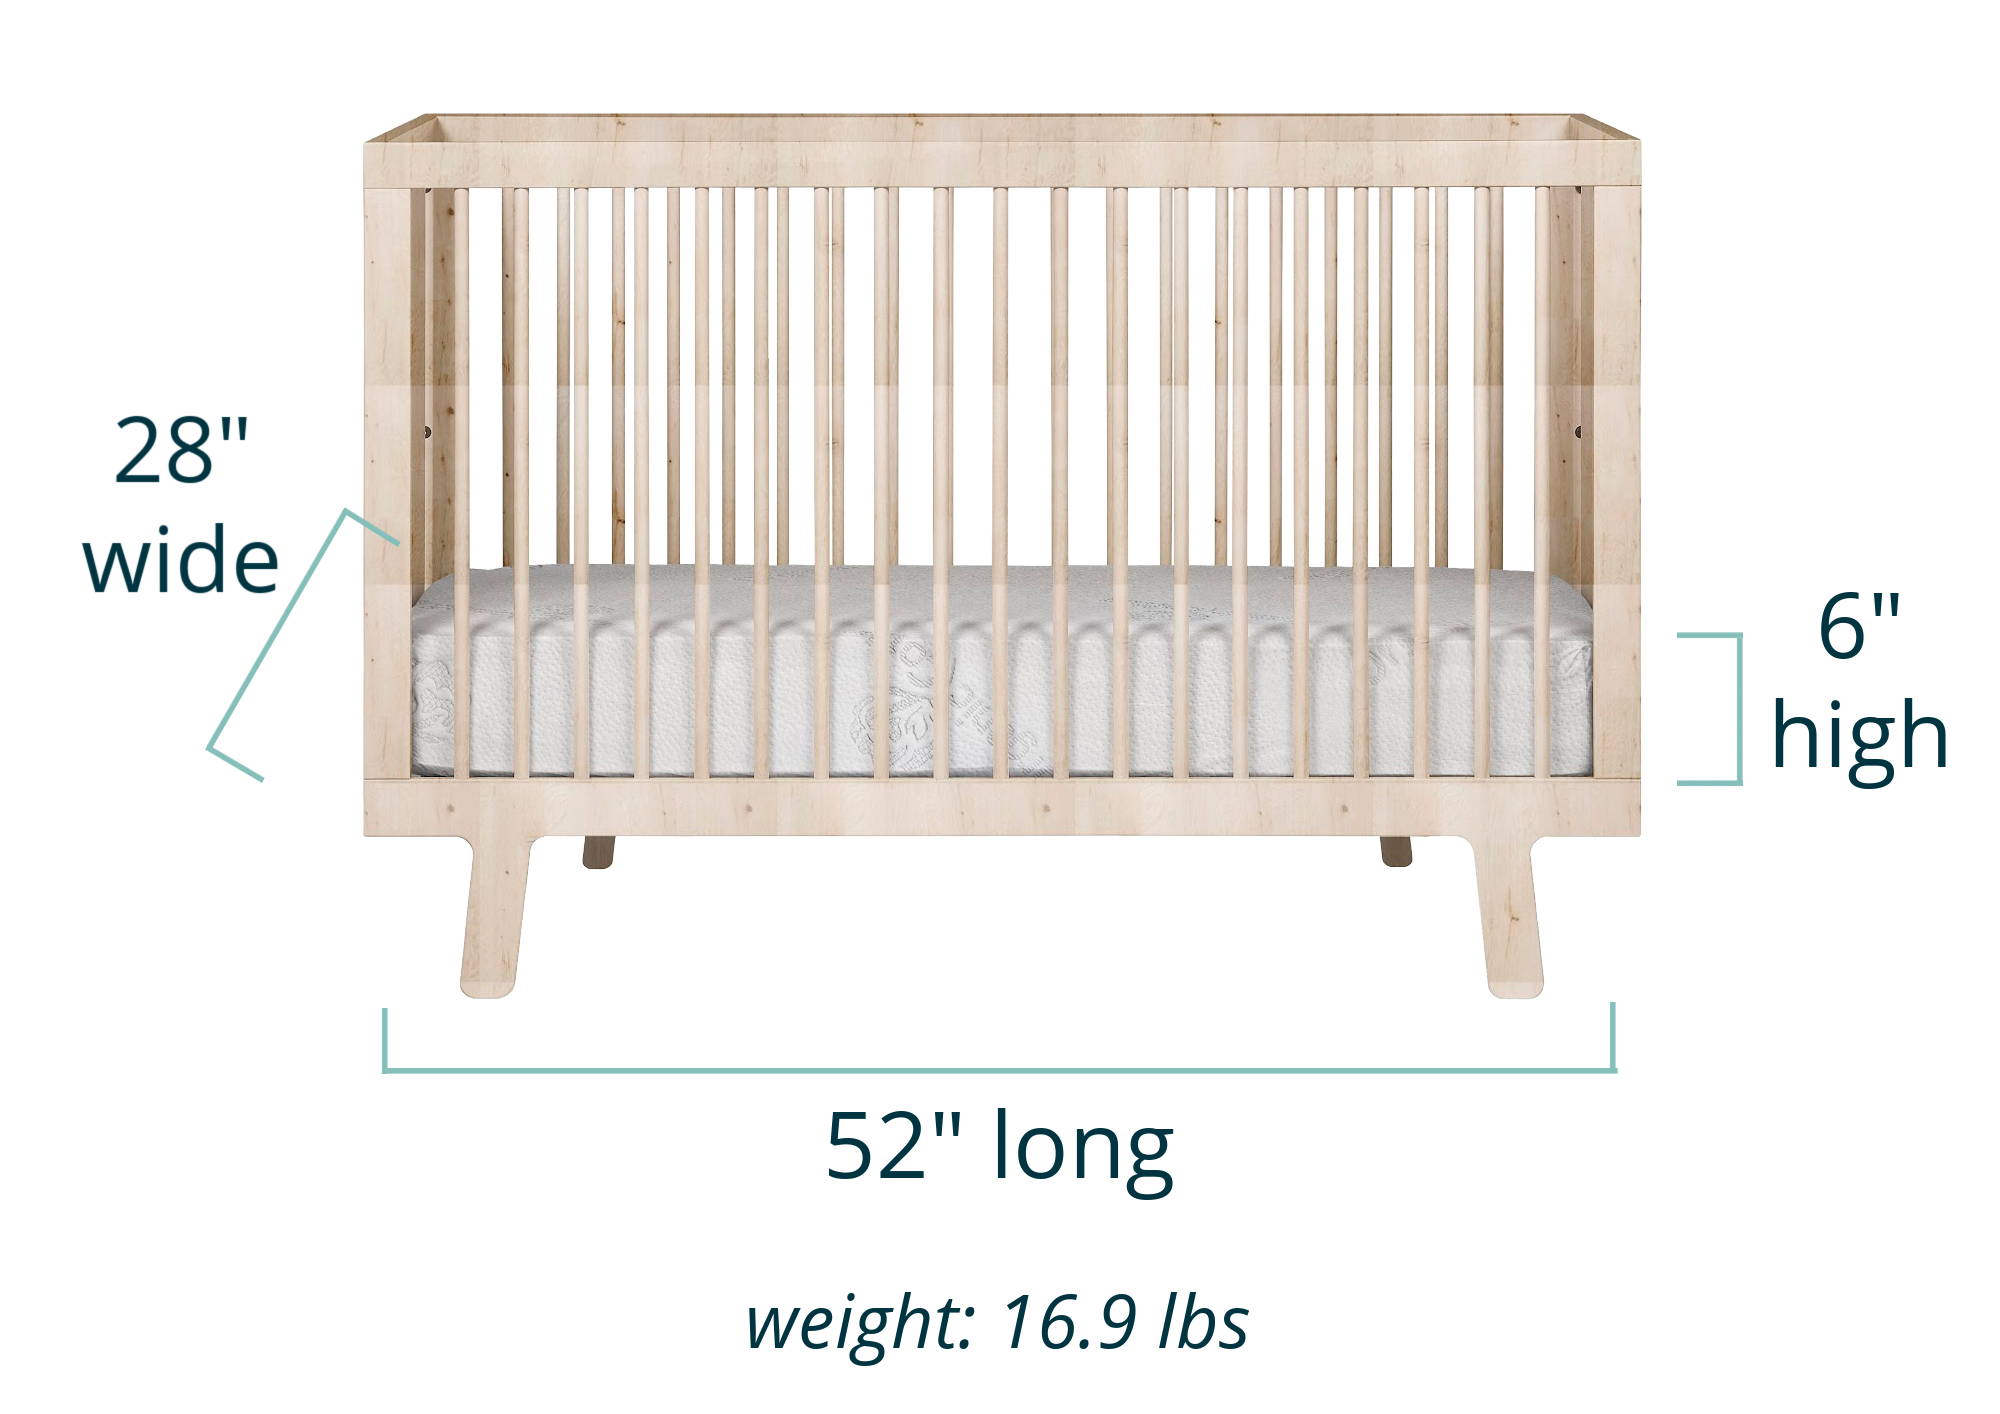 Hybrid Support Luxe crib mattress in a crib showing dimensions of 28